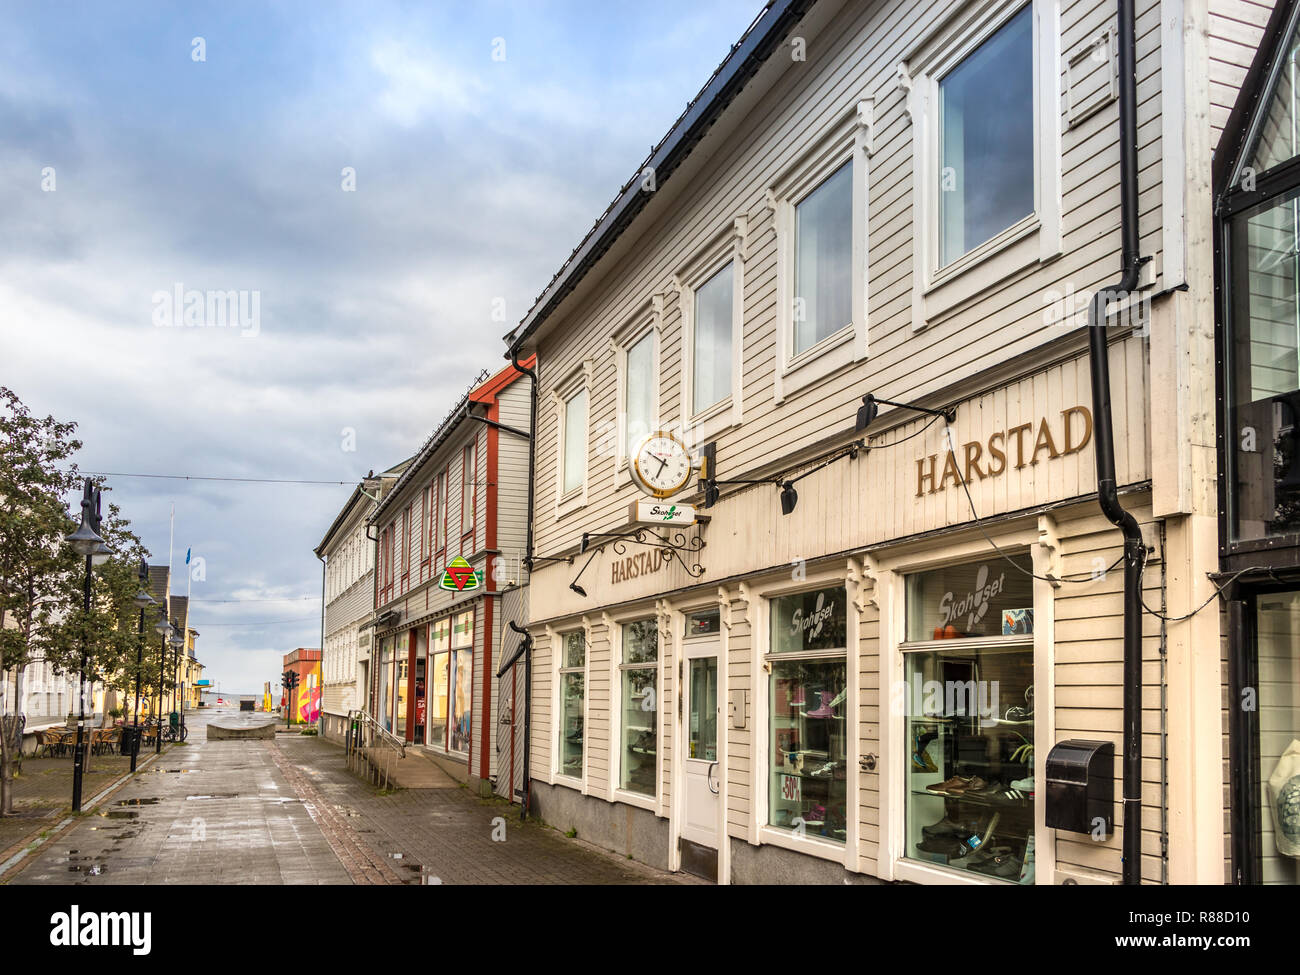 Harstad, Norway - August 19th, 2018: The city center of Harstad at summer on a cloudy day, Norway. Stock Photo